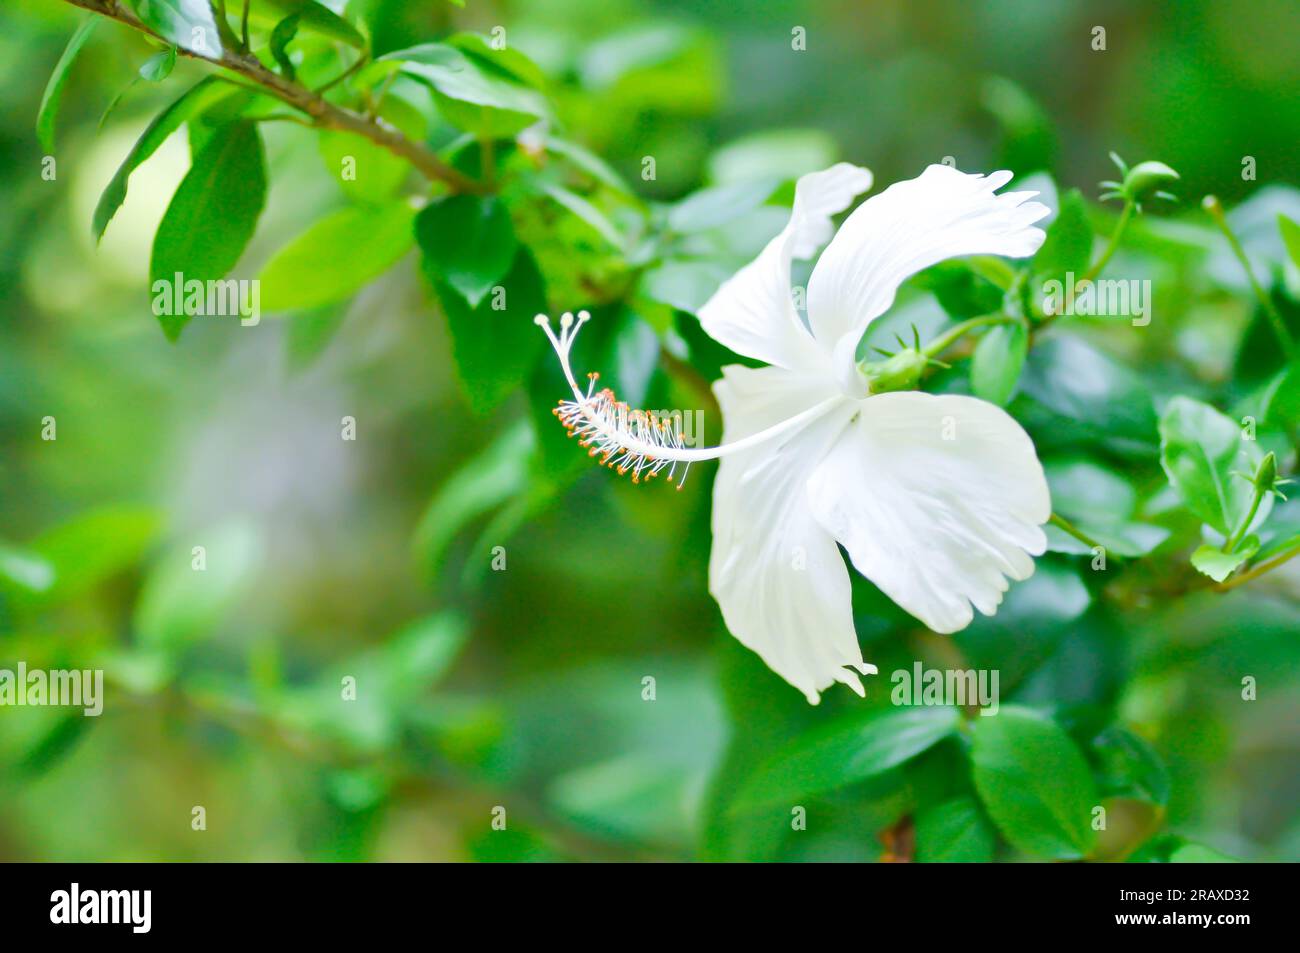 Chinese rose or Hibiscus or white flower Stock Photo